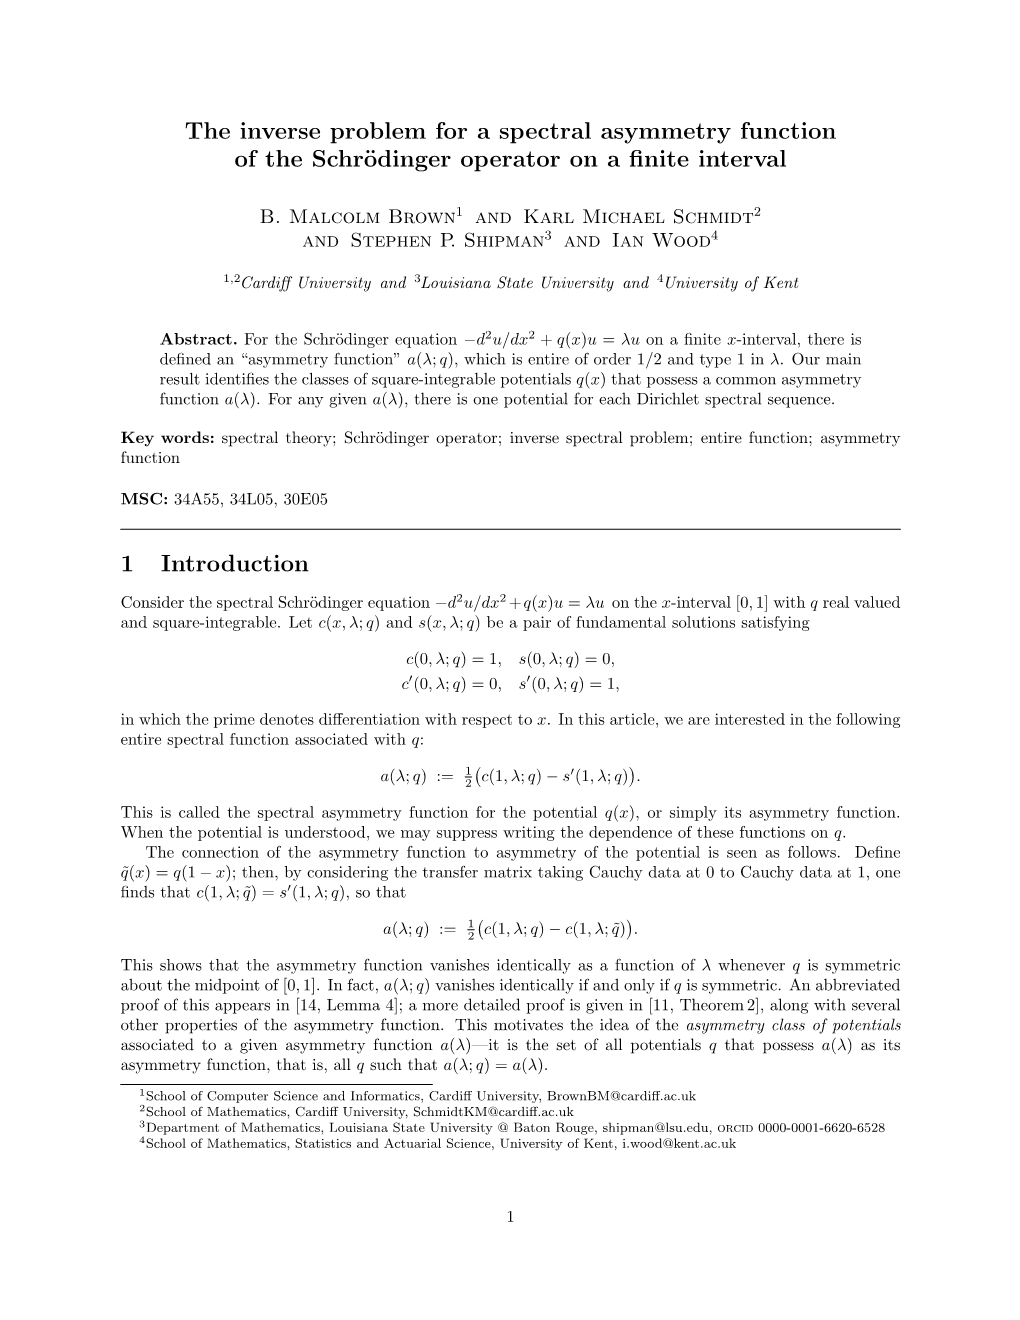 The Inverse Problem for a Spectral Asymmetry Function of the Schr¨Odingeroperator on a ﬁnite Interval